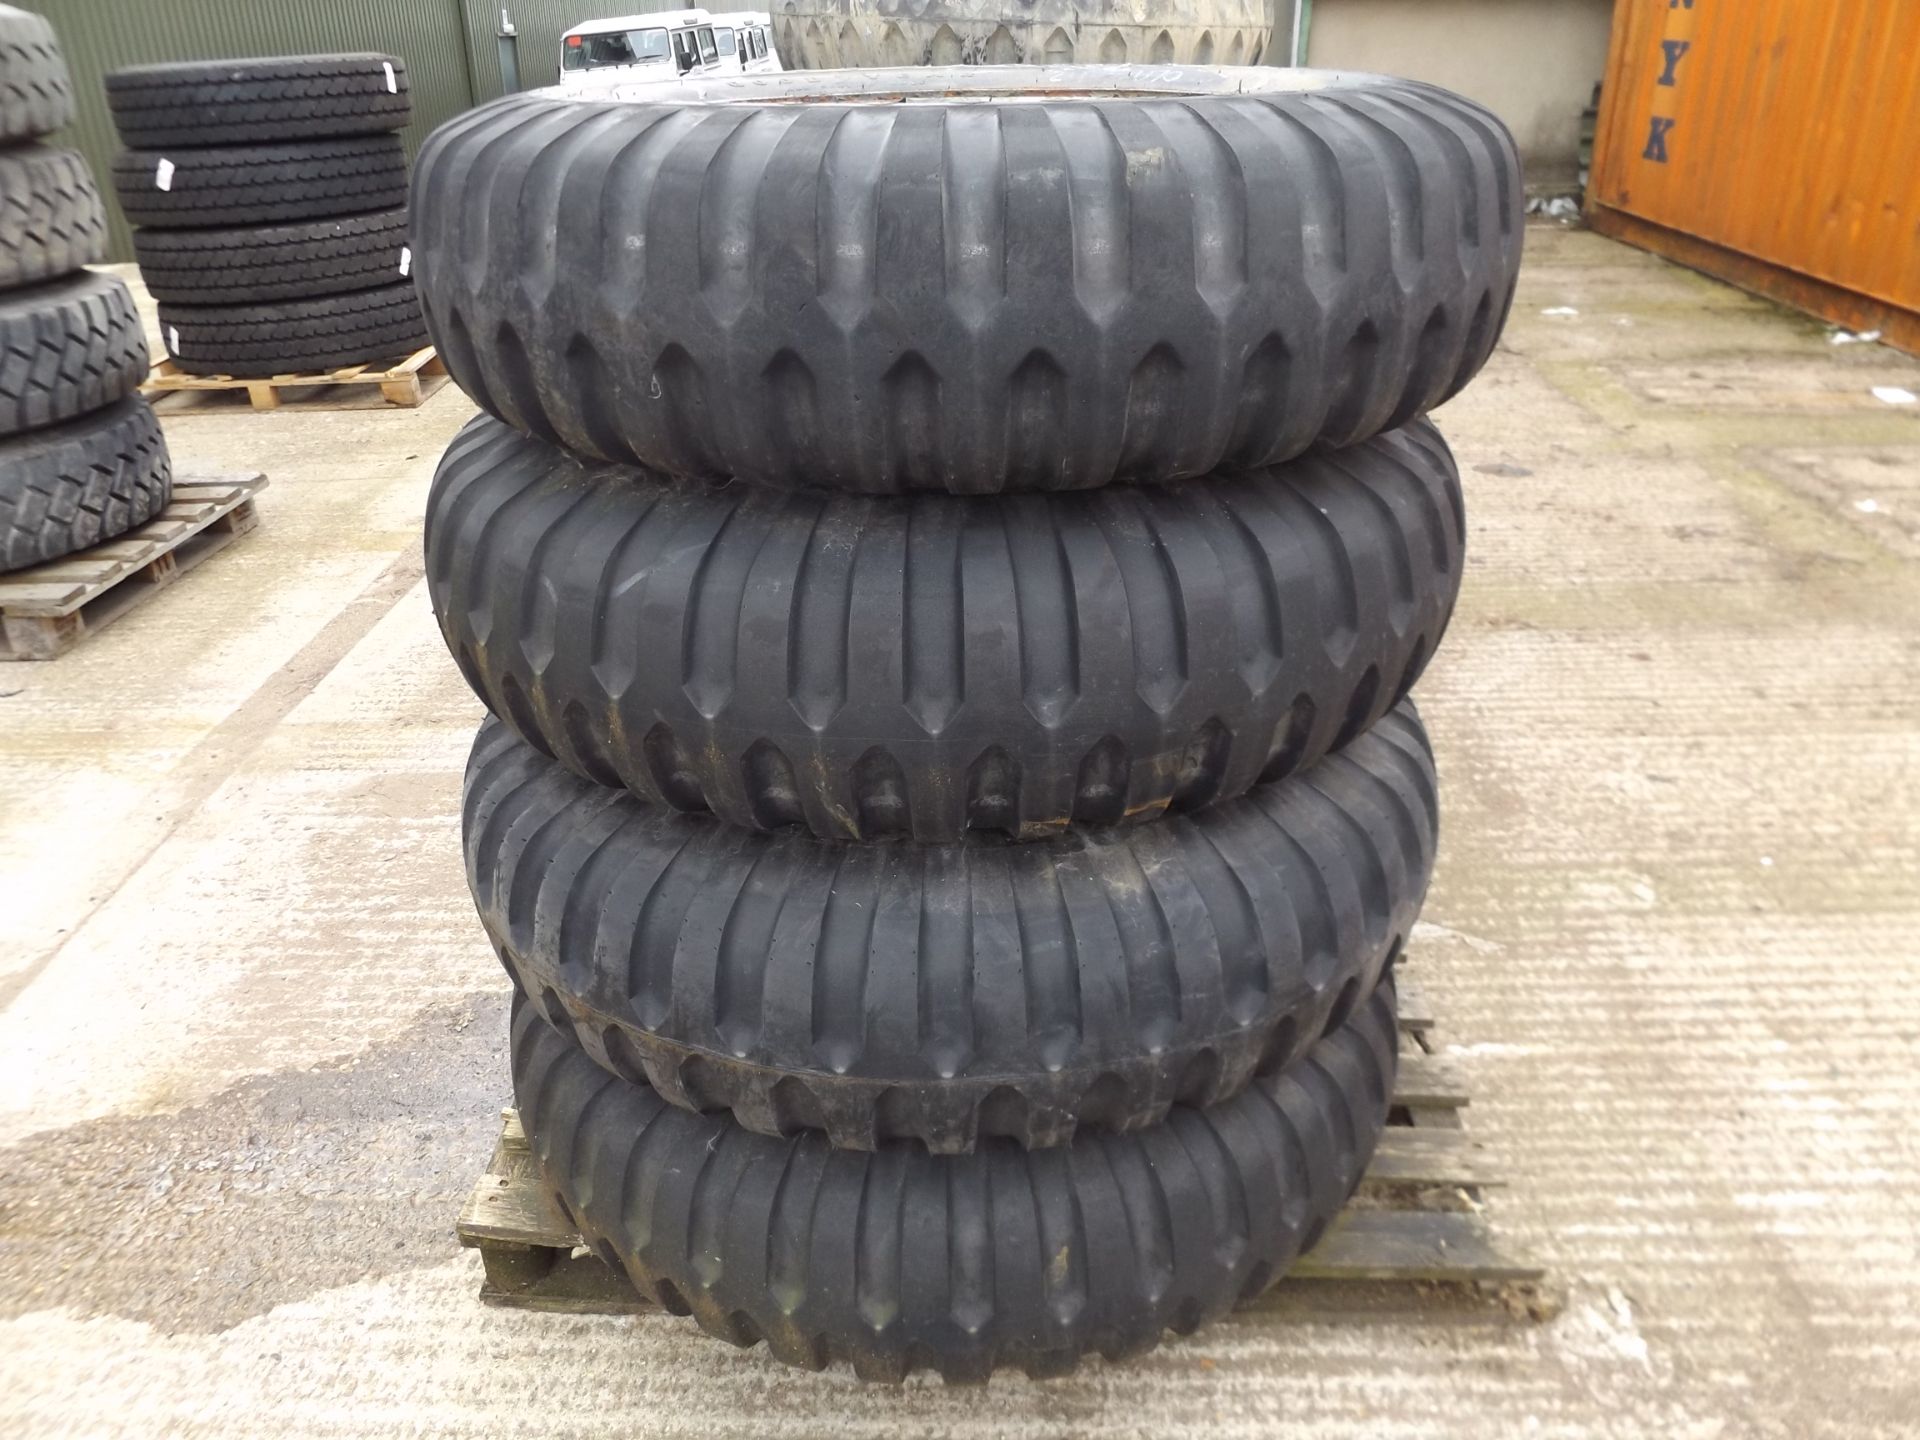 4 x Goodyear 11.00 20 12 Ply Tyres complete with 10 stud rims